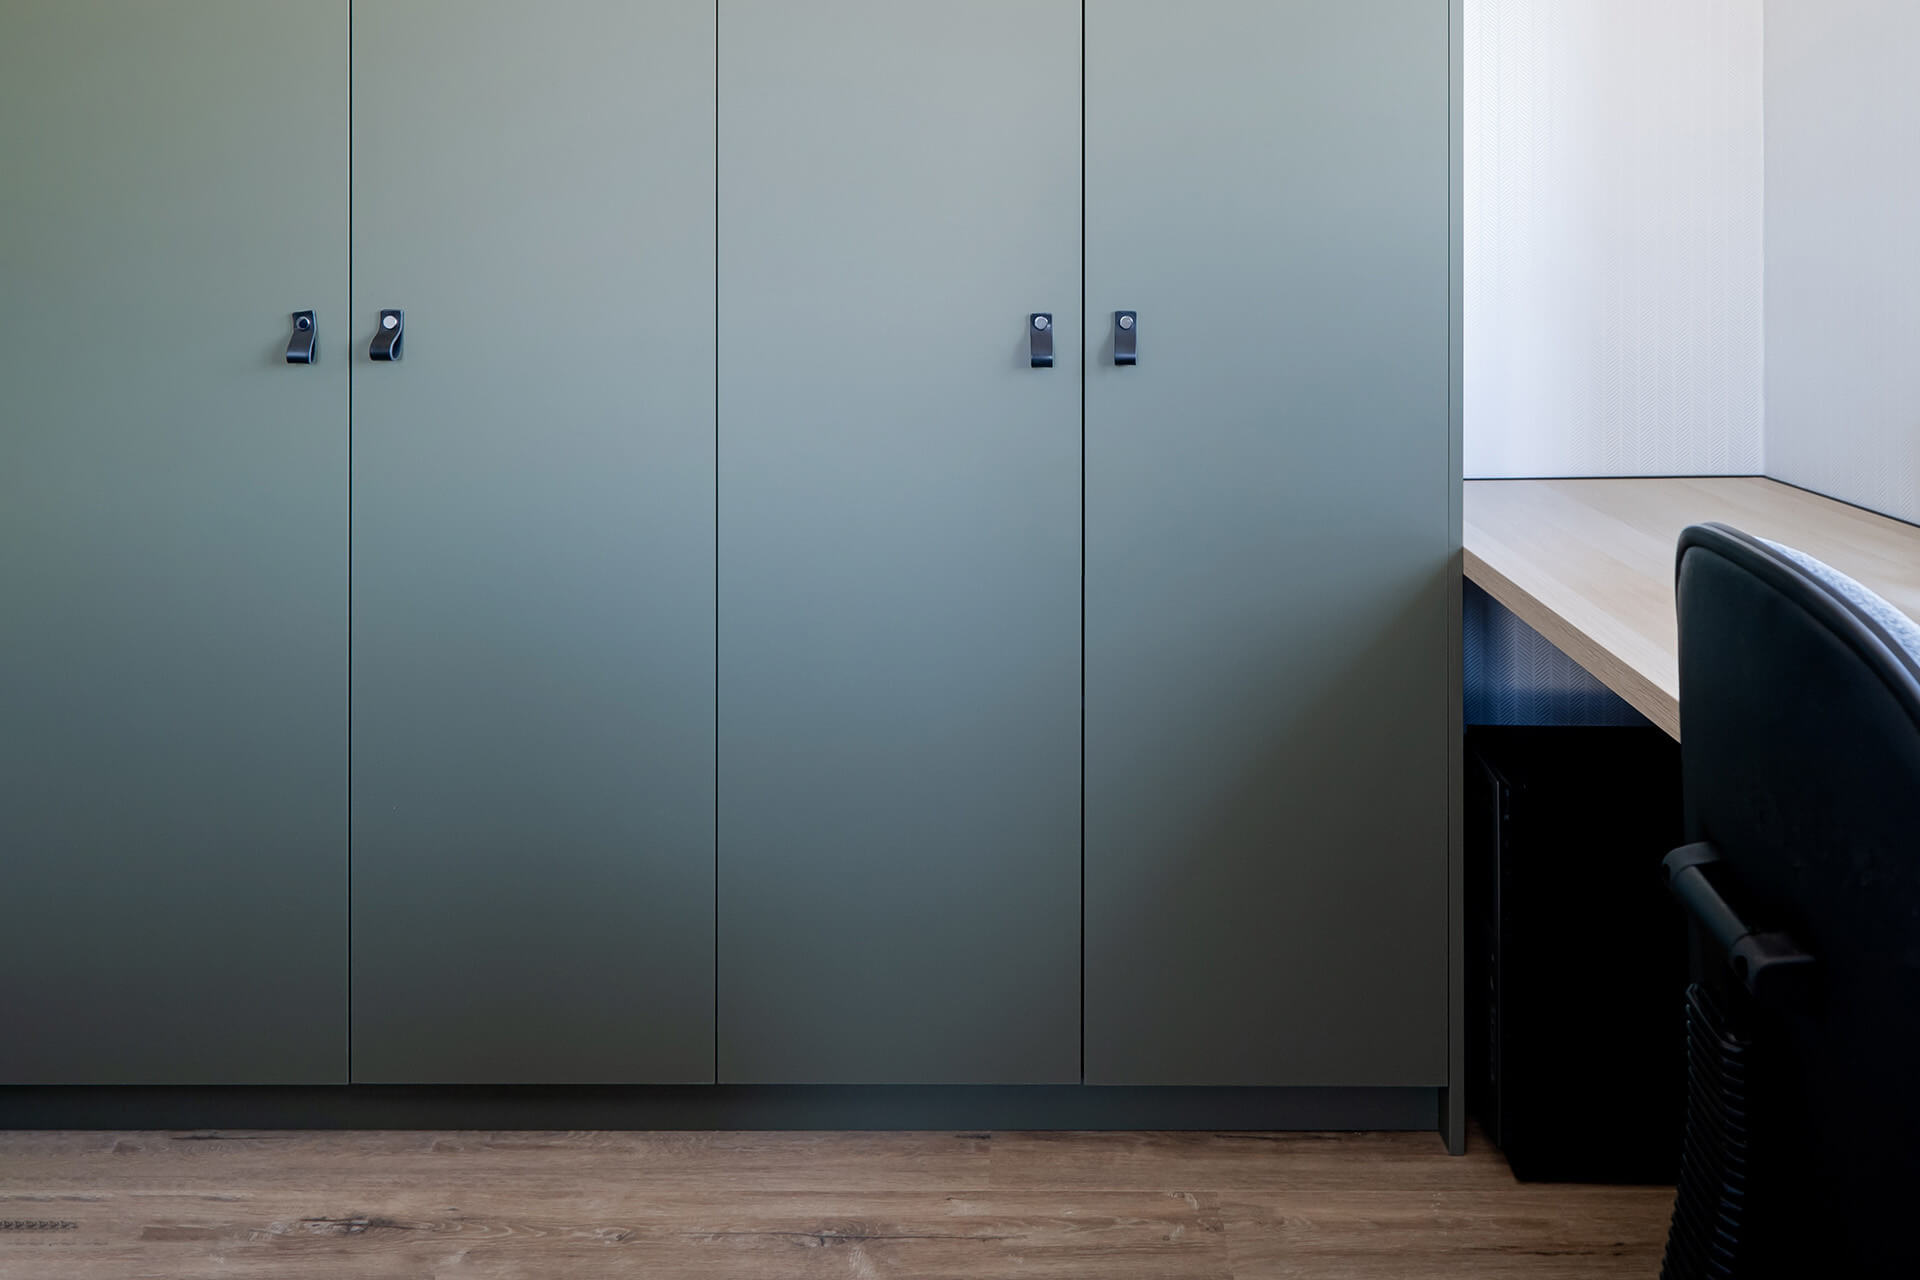 Custom-made office furniture in the colour Green Shadow, from maatkasten online